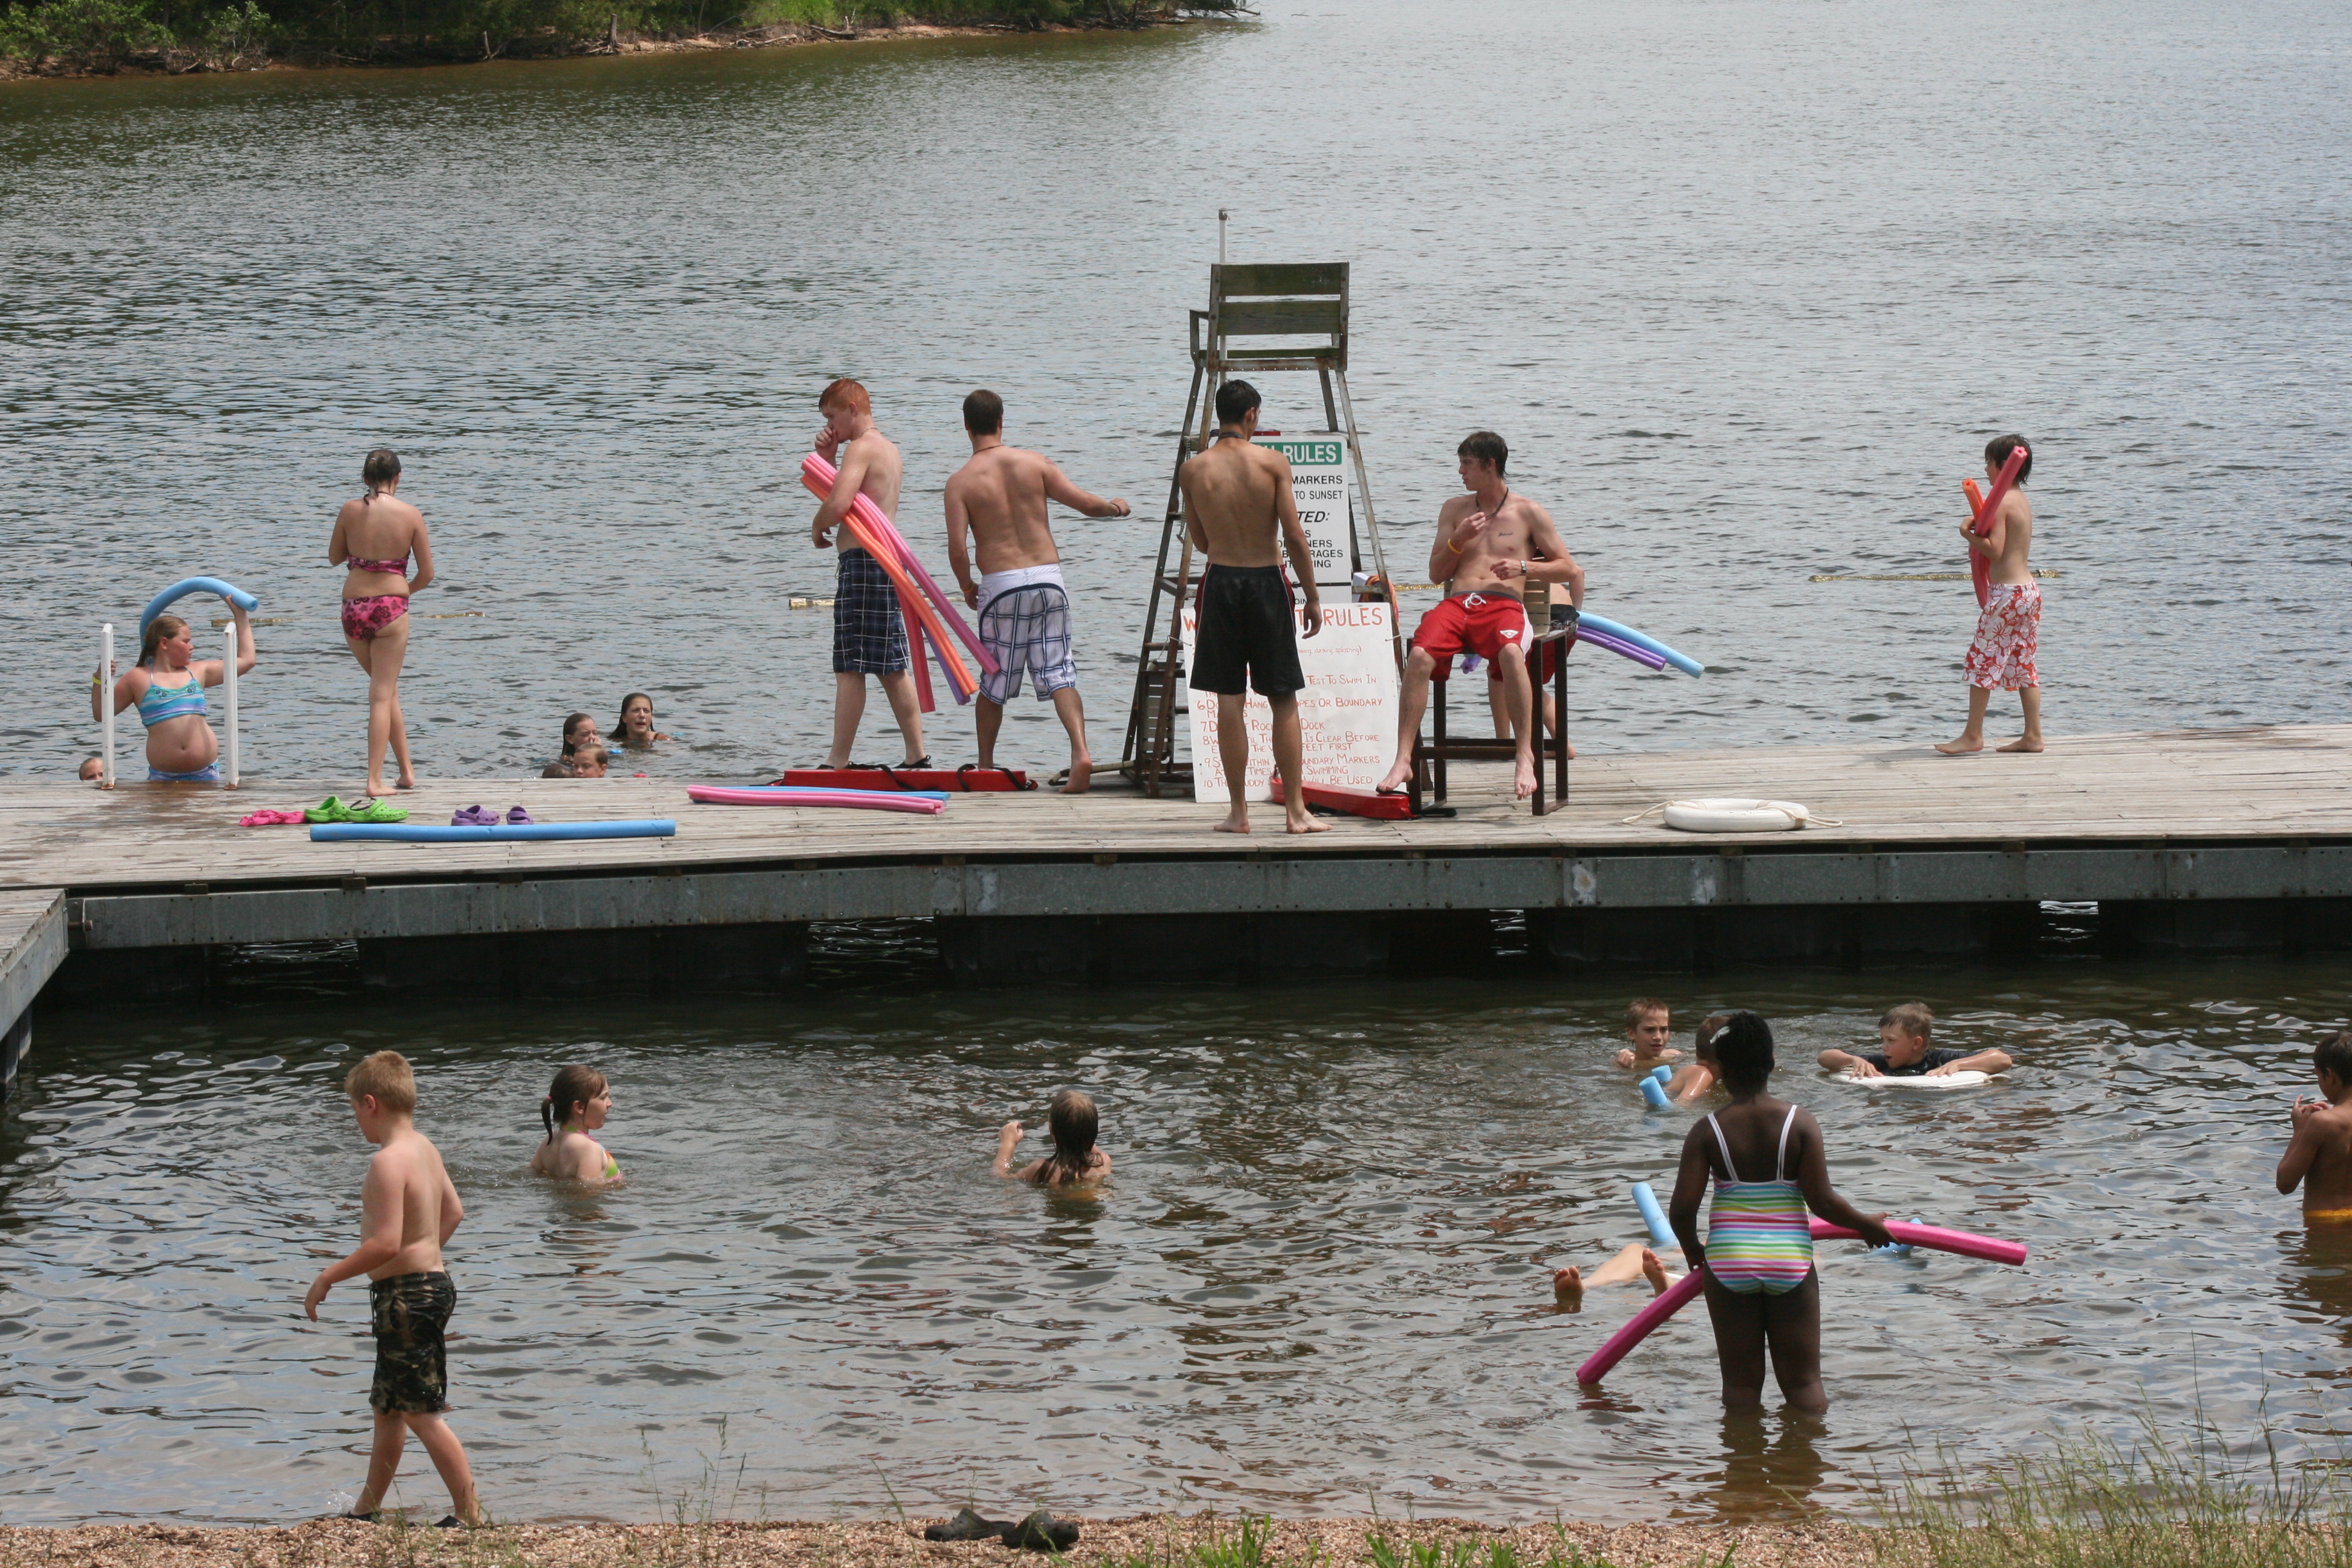 Kids on the swimming dock and swimming in the lake